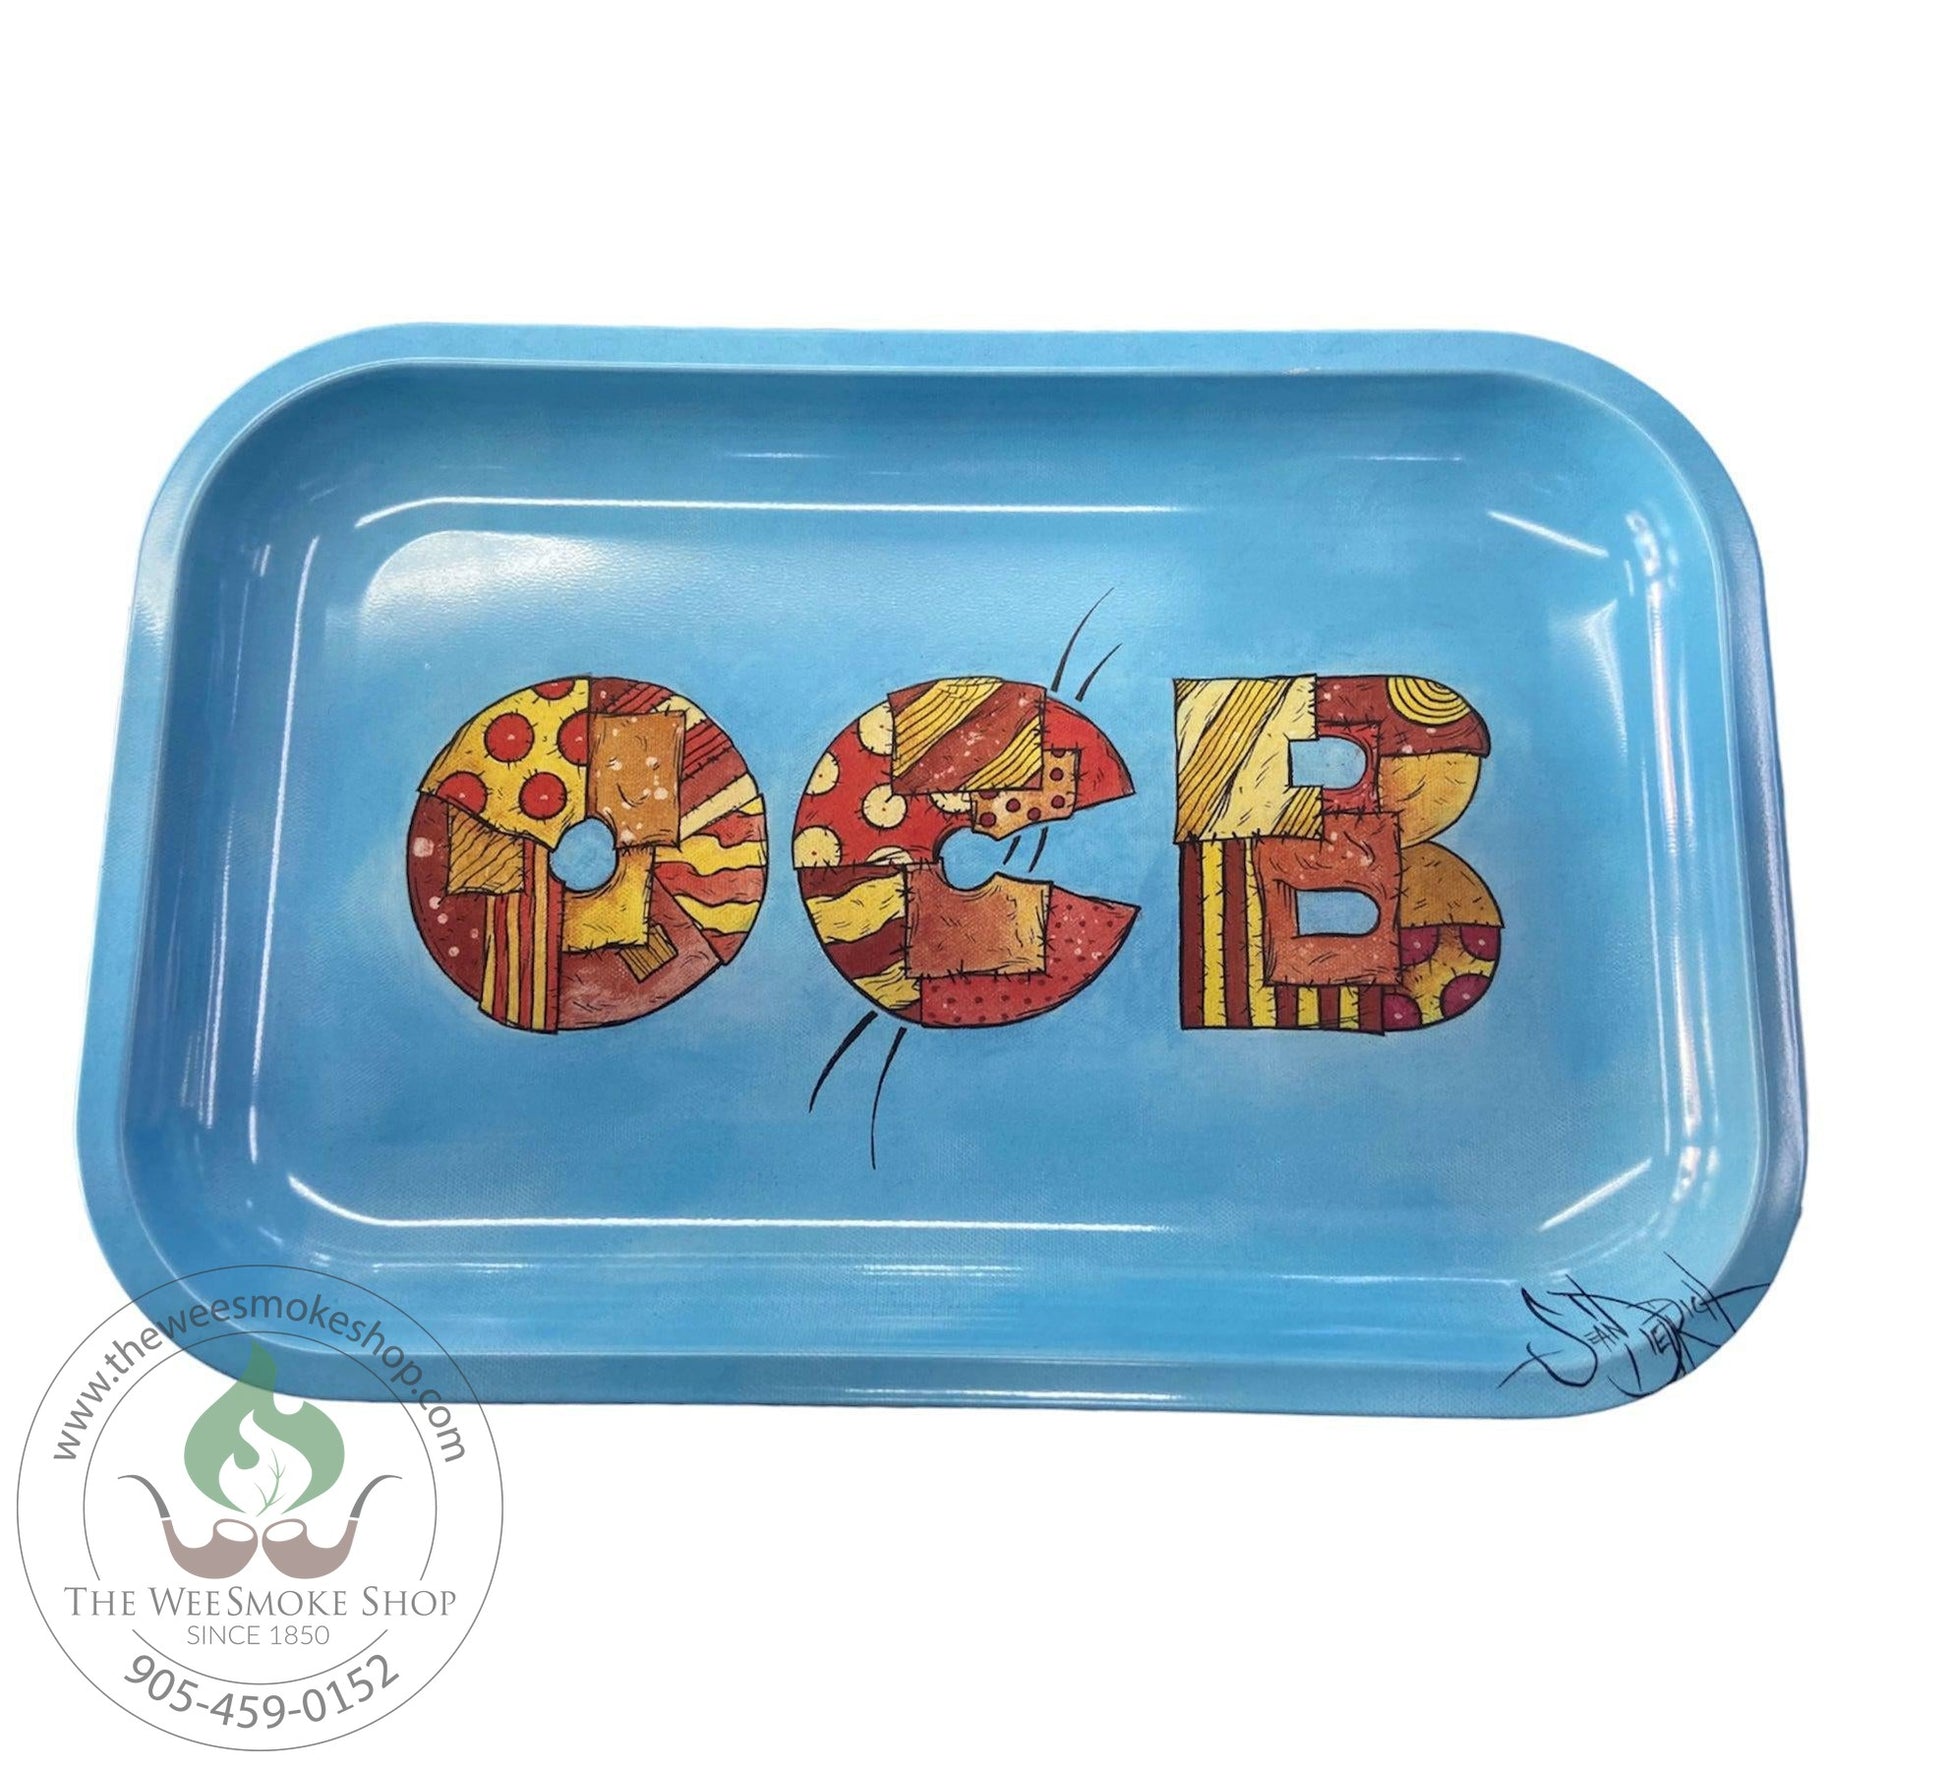 OCB Patchwork Small Tray-Small trays-The Wee Smoke Shop